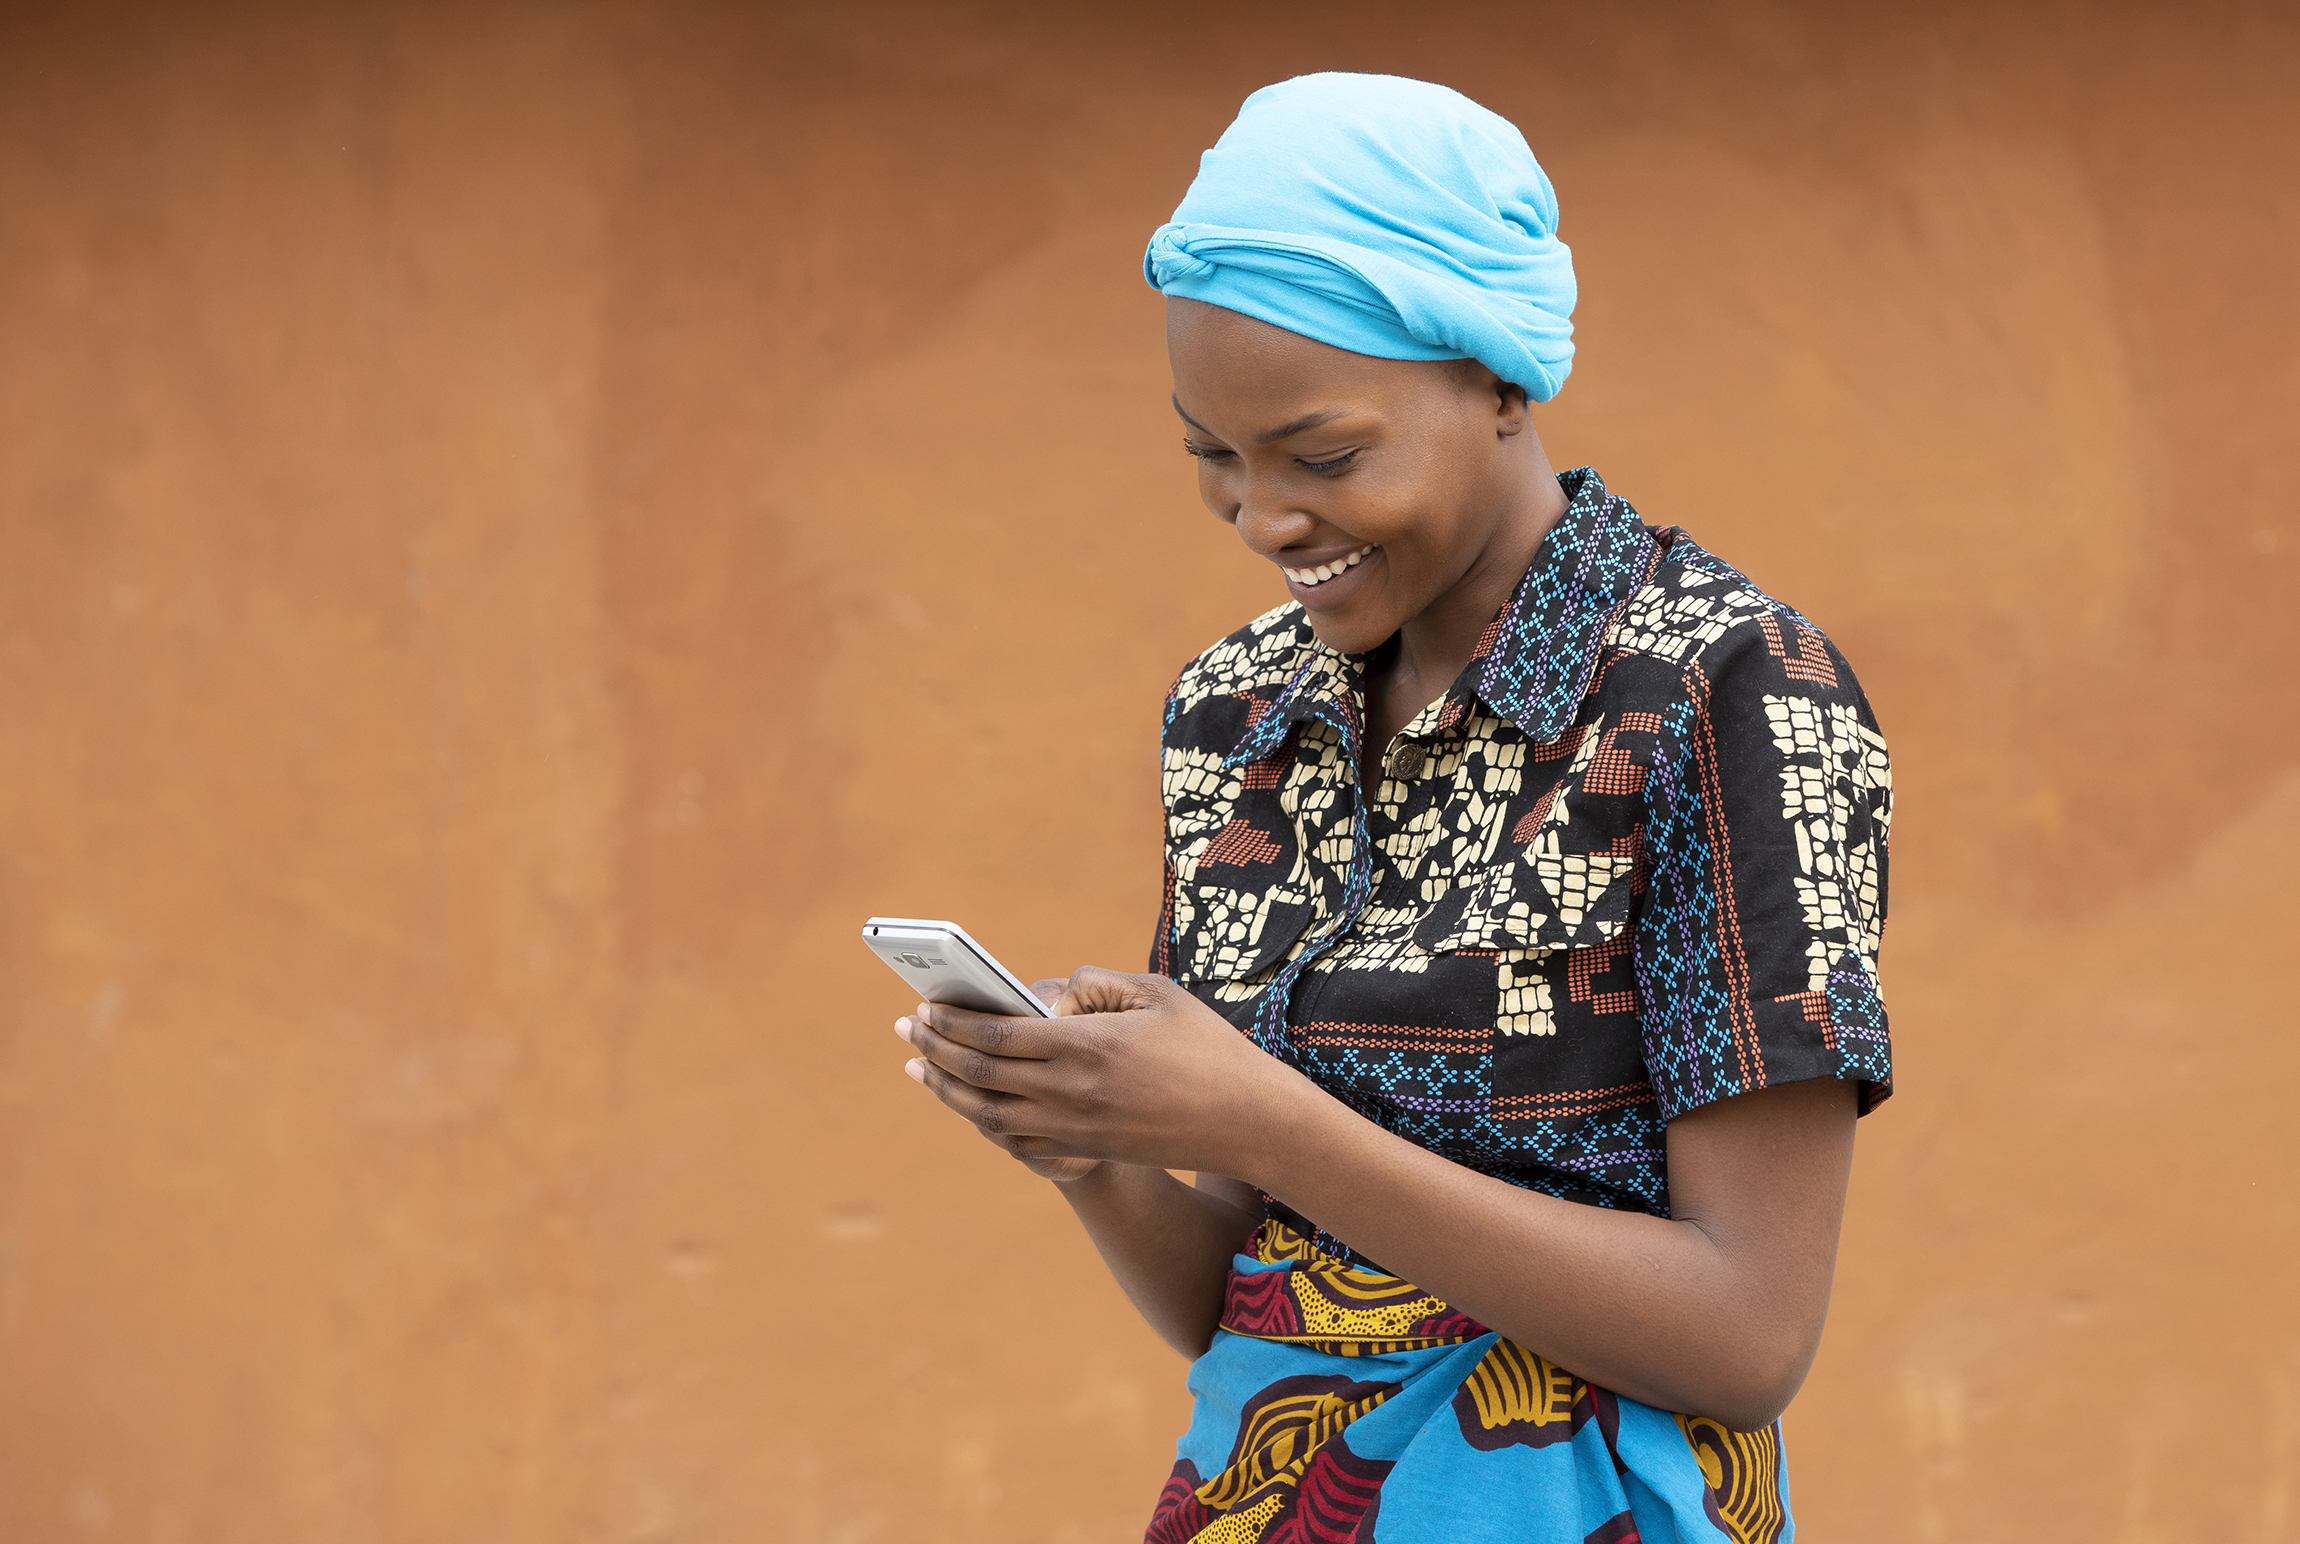 A young Zambian lady walking on the street looking at her phone and laughing